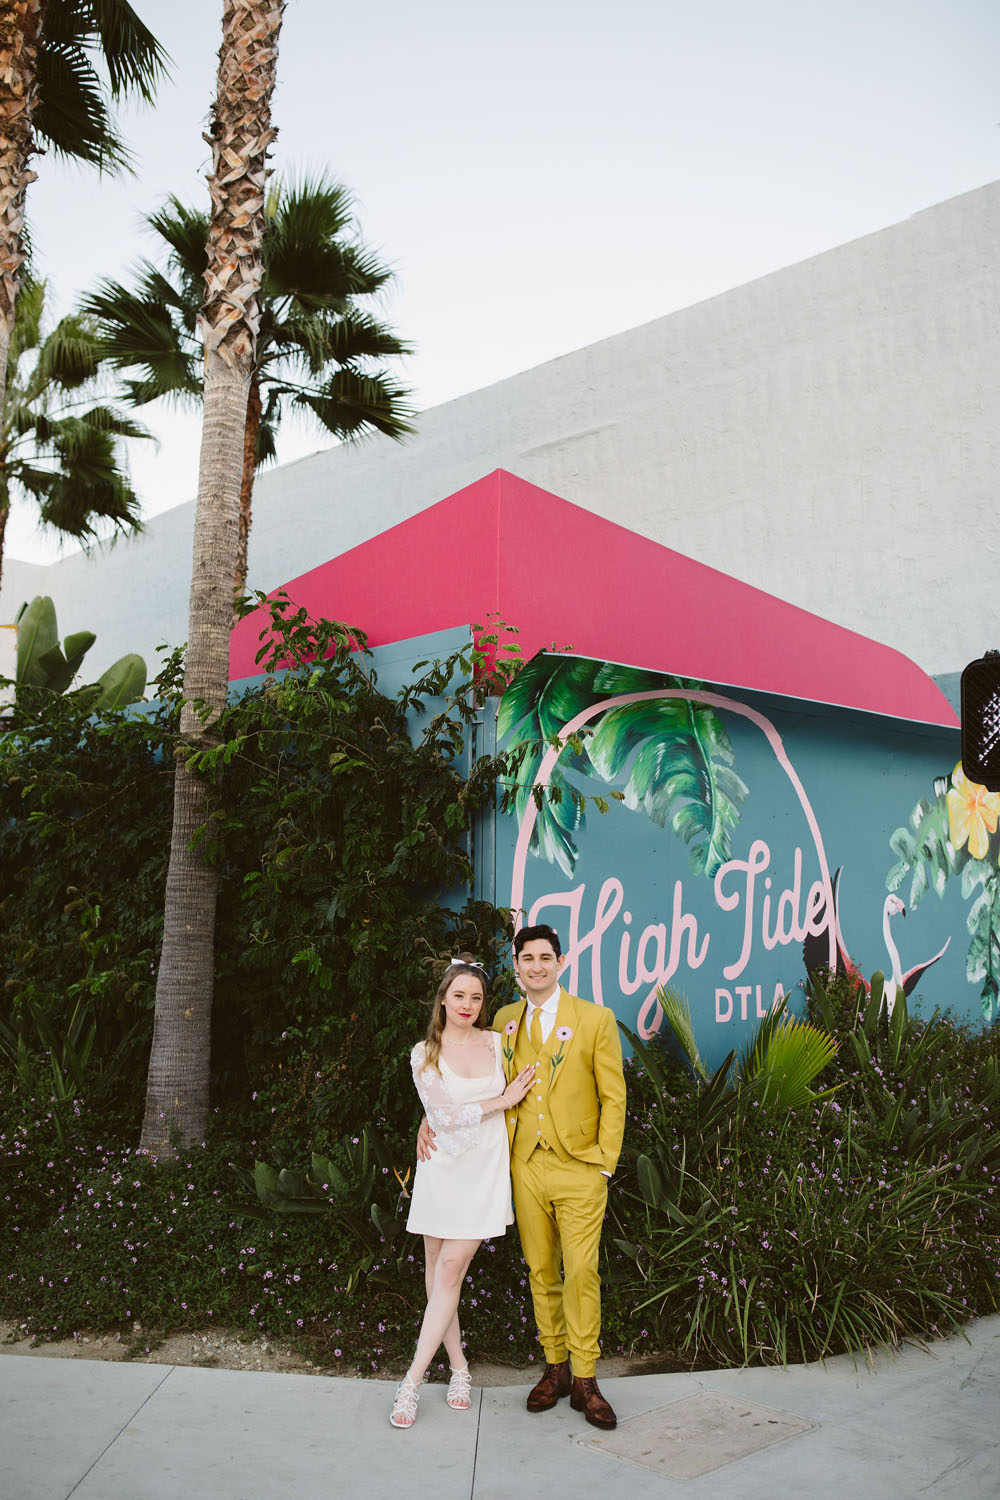 retro bride and groom fashion with yellow groom's suit